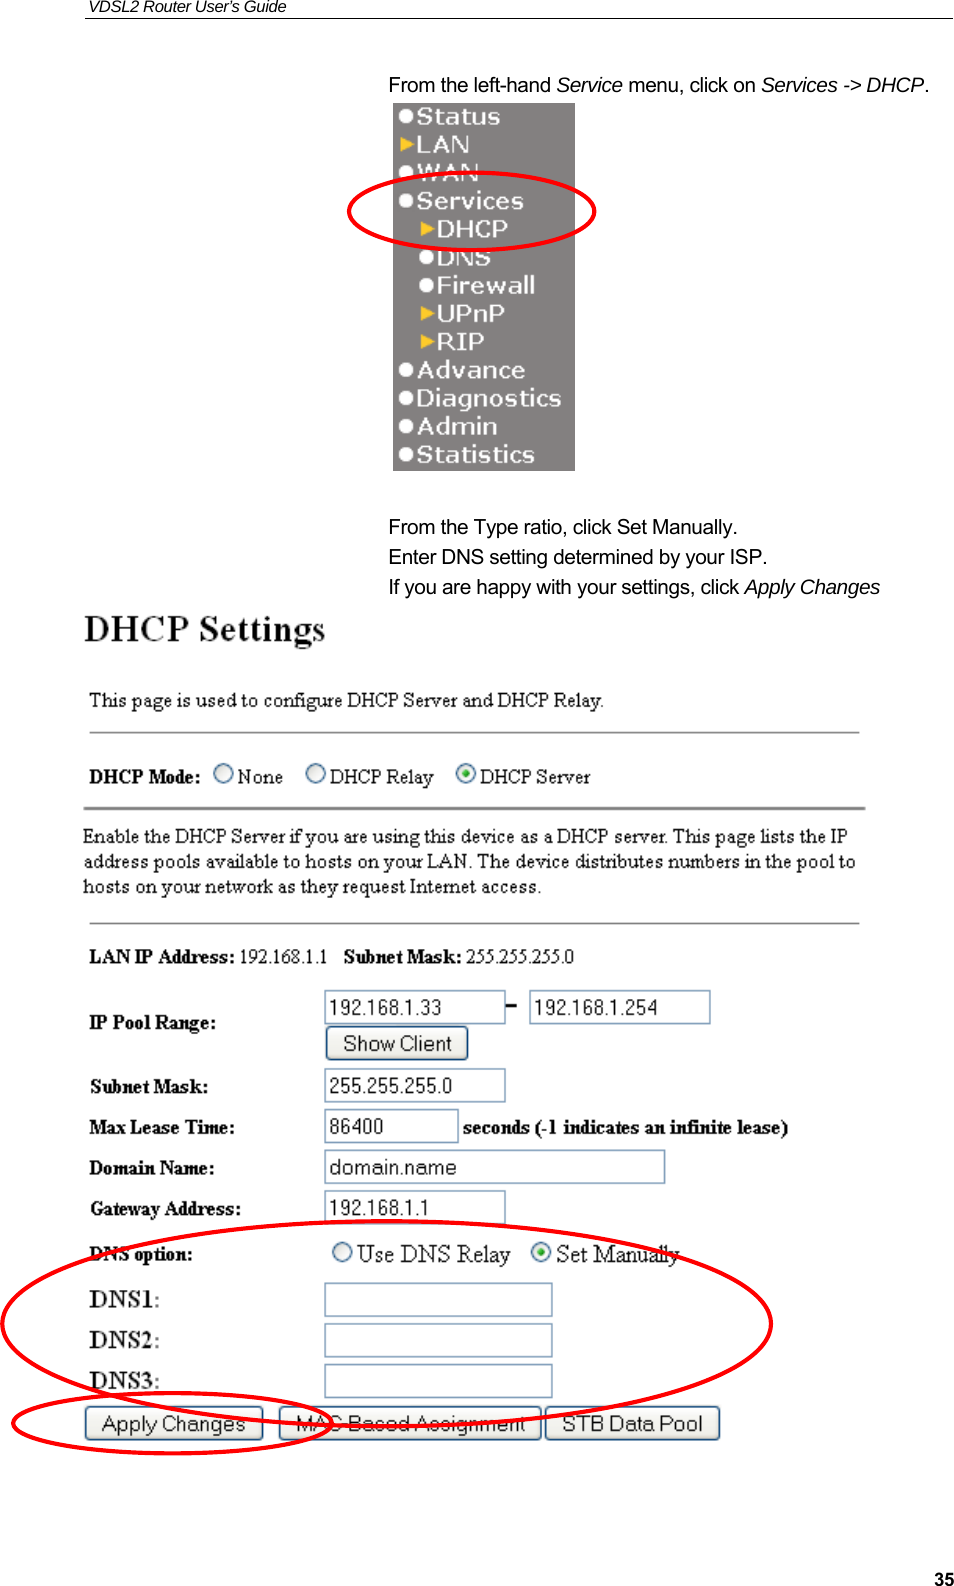 VDSL2 Router User’s Guide     35From the left-hand Service menu, click on Services -&gt; DHCP.    From the Type ratio, click Set Manually. Enter DNS setting determined by your ISP. If you are happy with your settings, click Apply Changes    